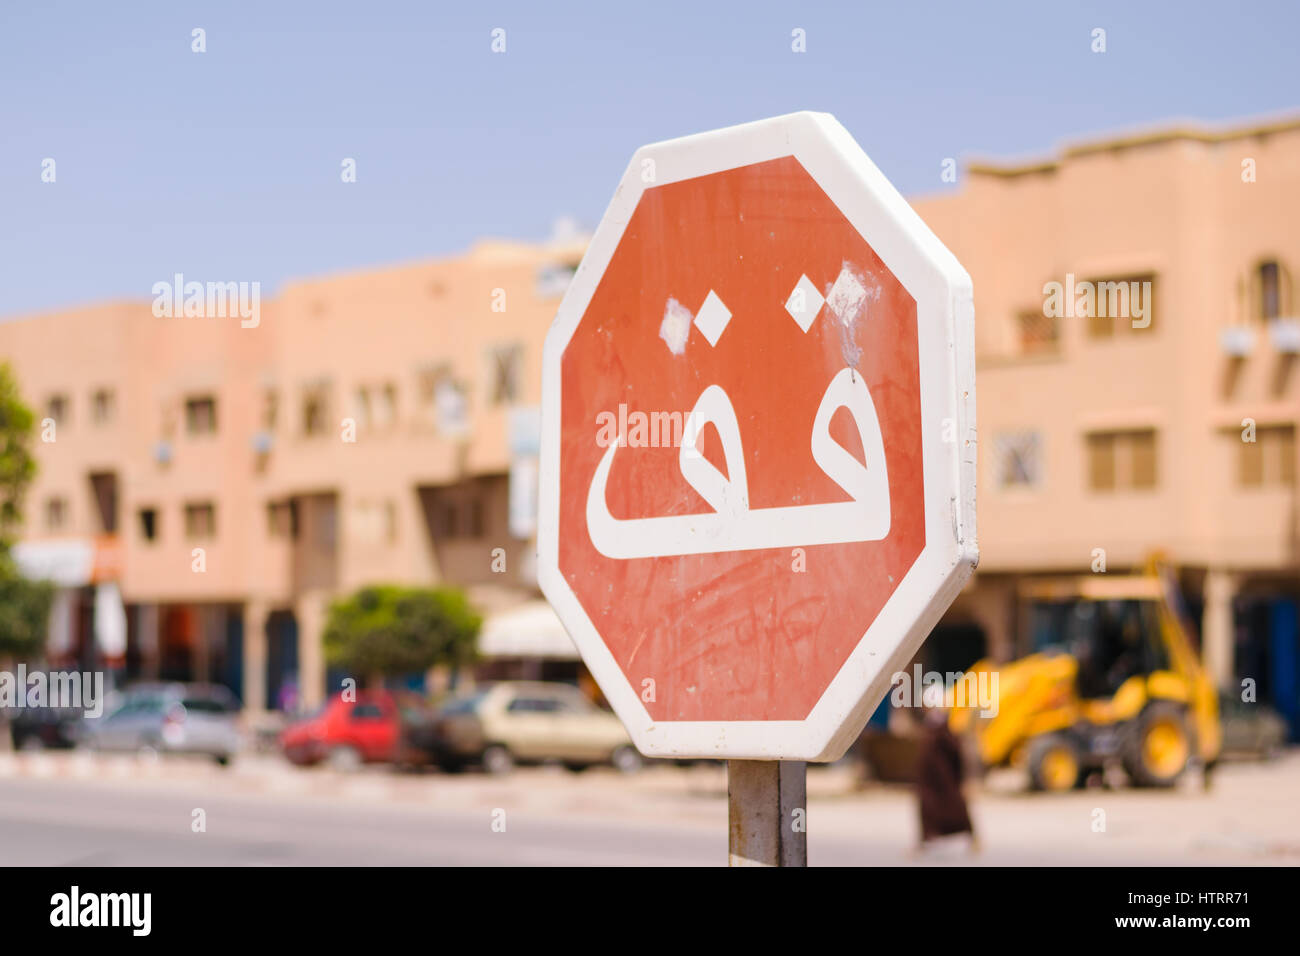 Image of a stop sign in focus and a blurred background whith arabic script in Morocco. Stock Photo